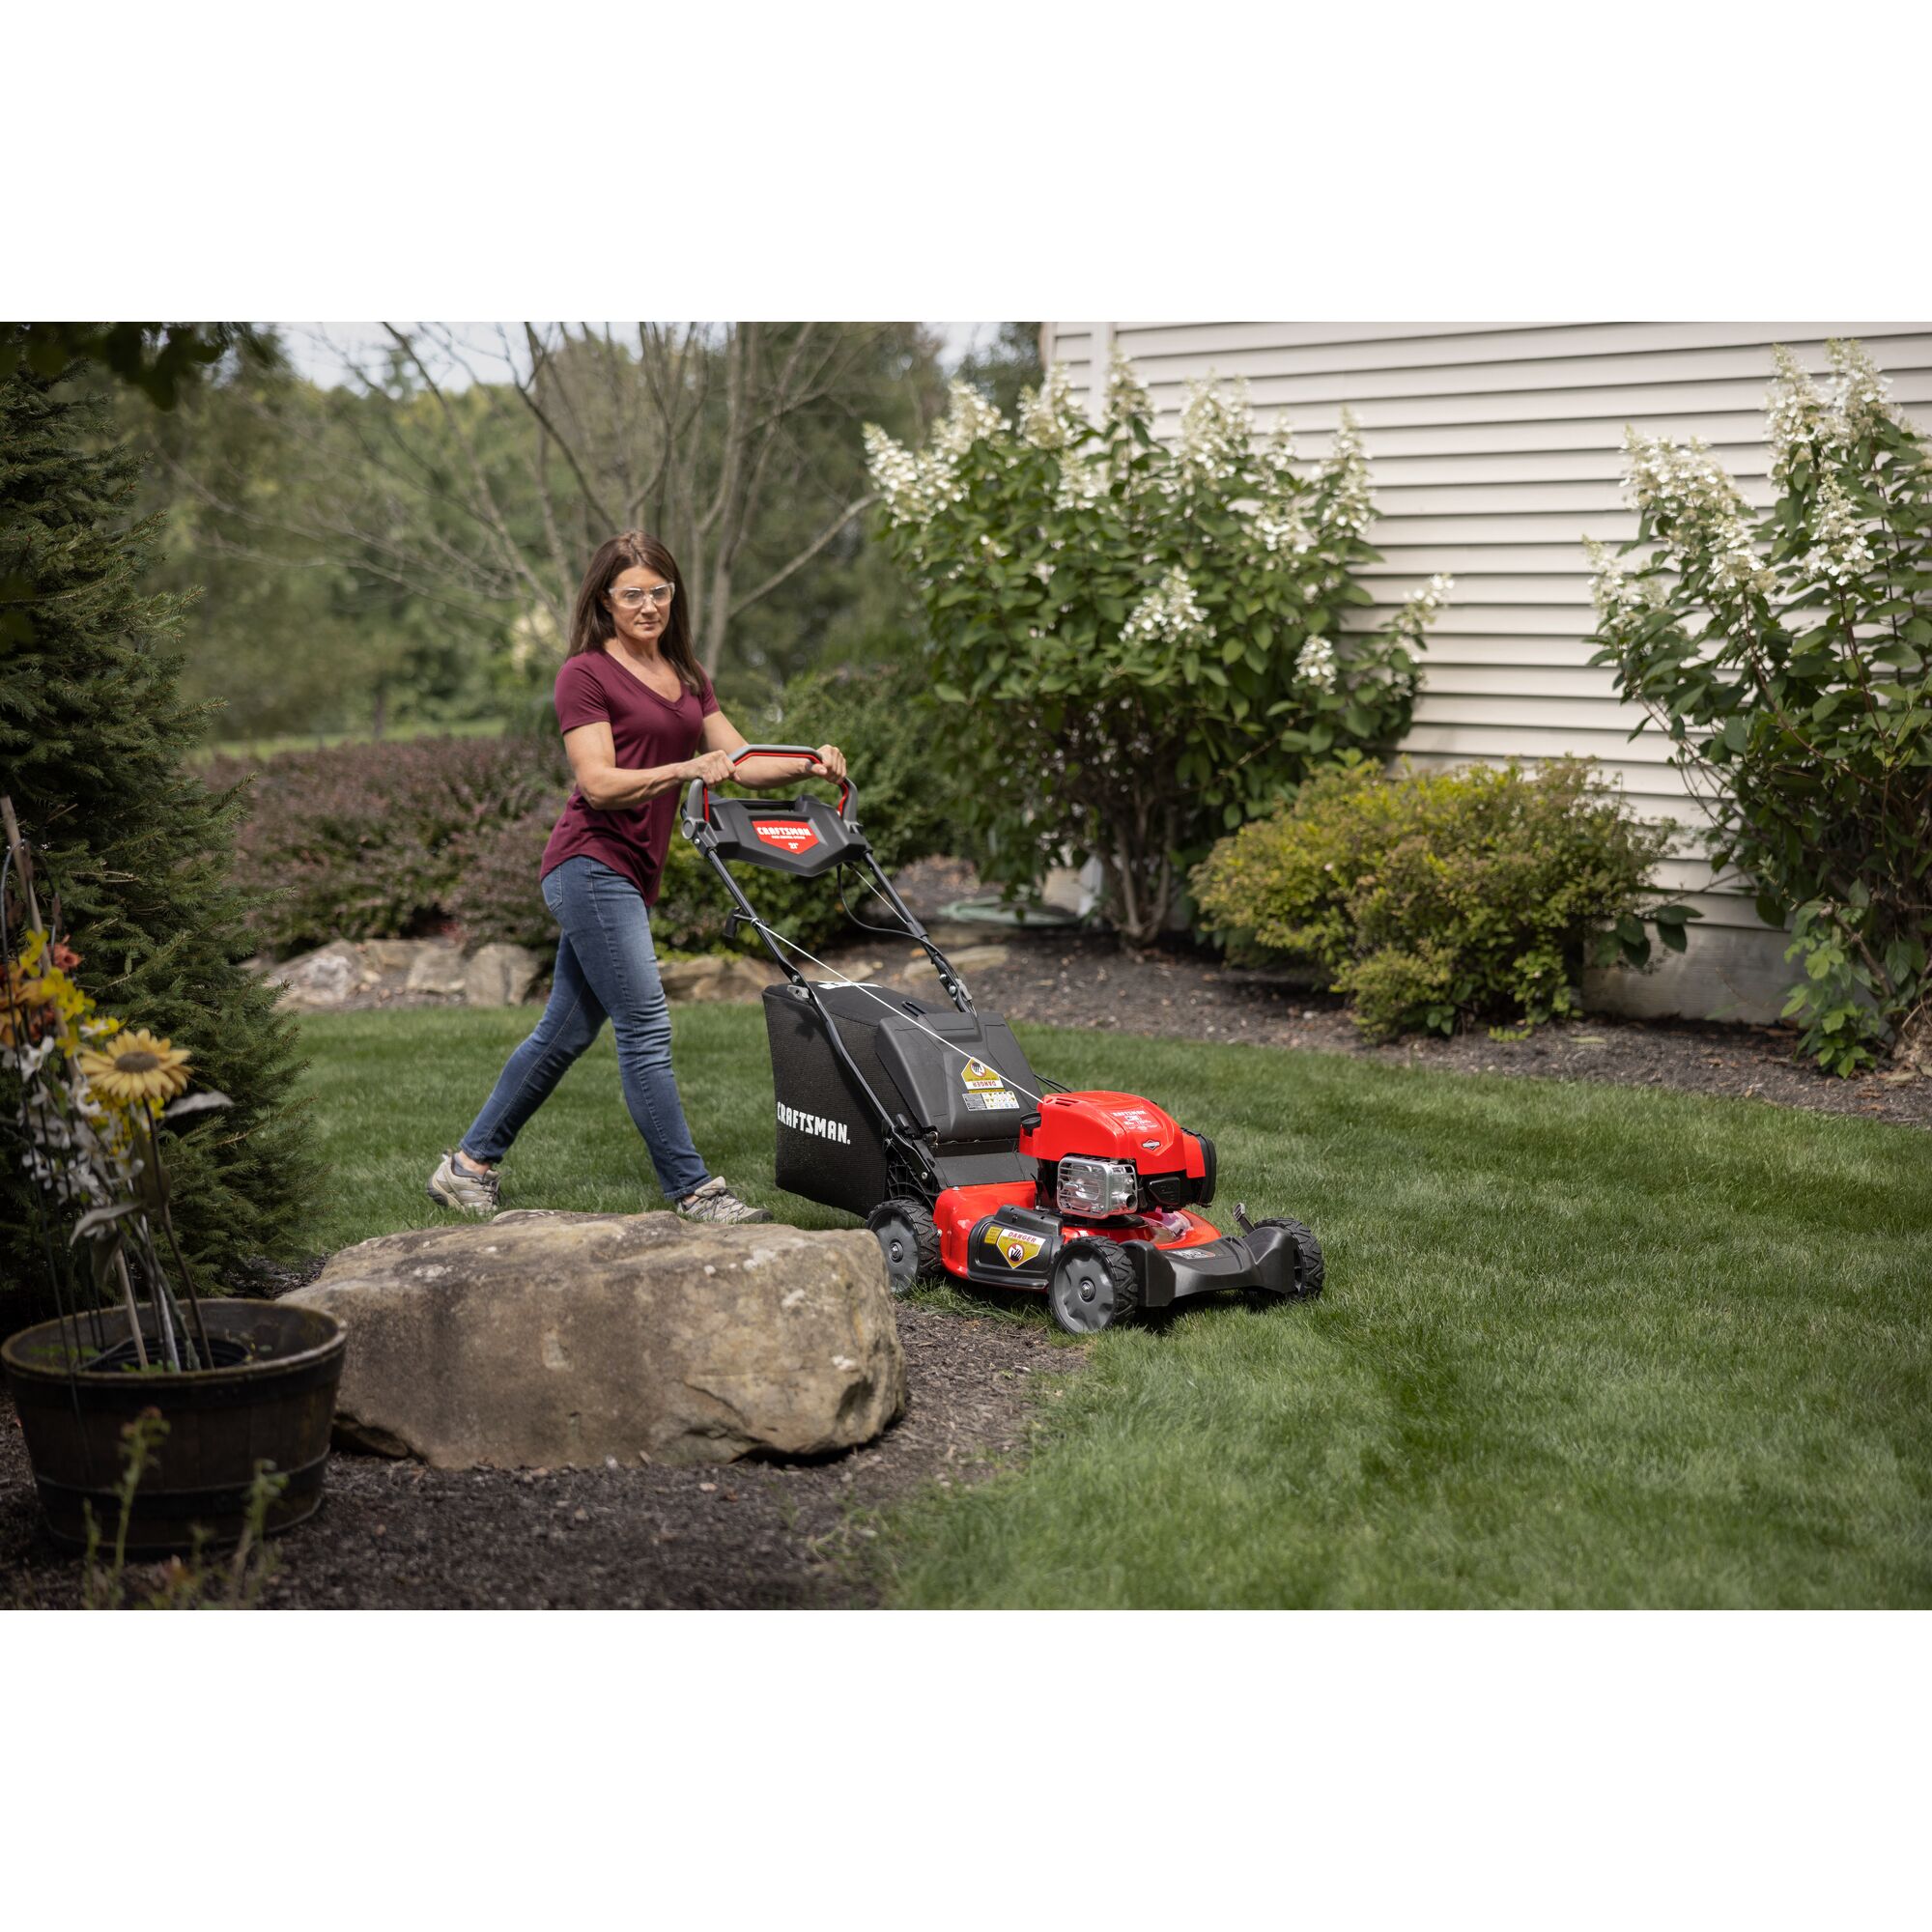 CRAFTSMAN M310 Gas Push Mower mowing around flower bed with large rock